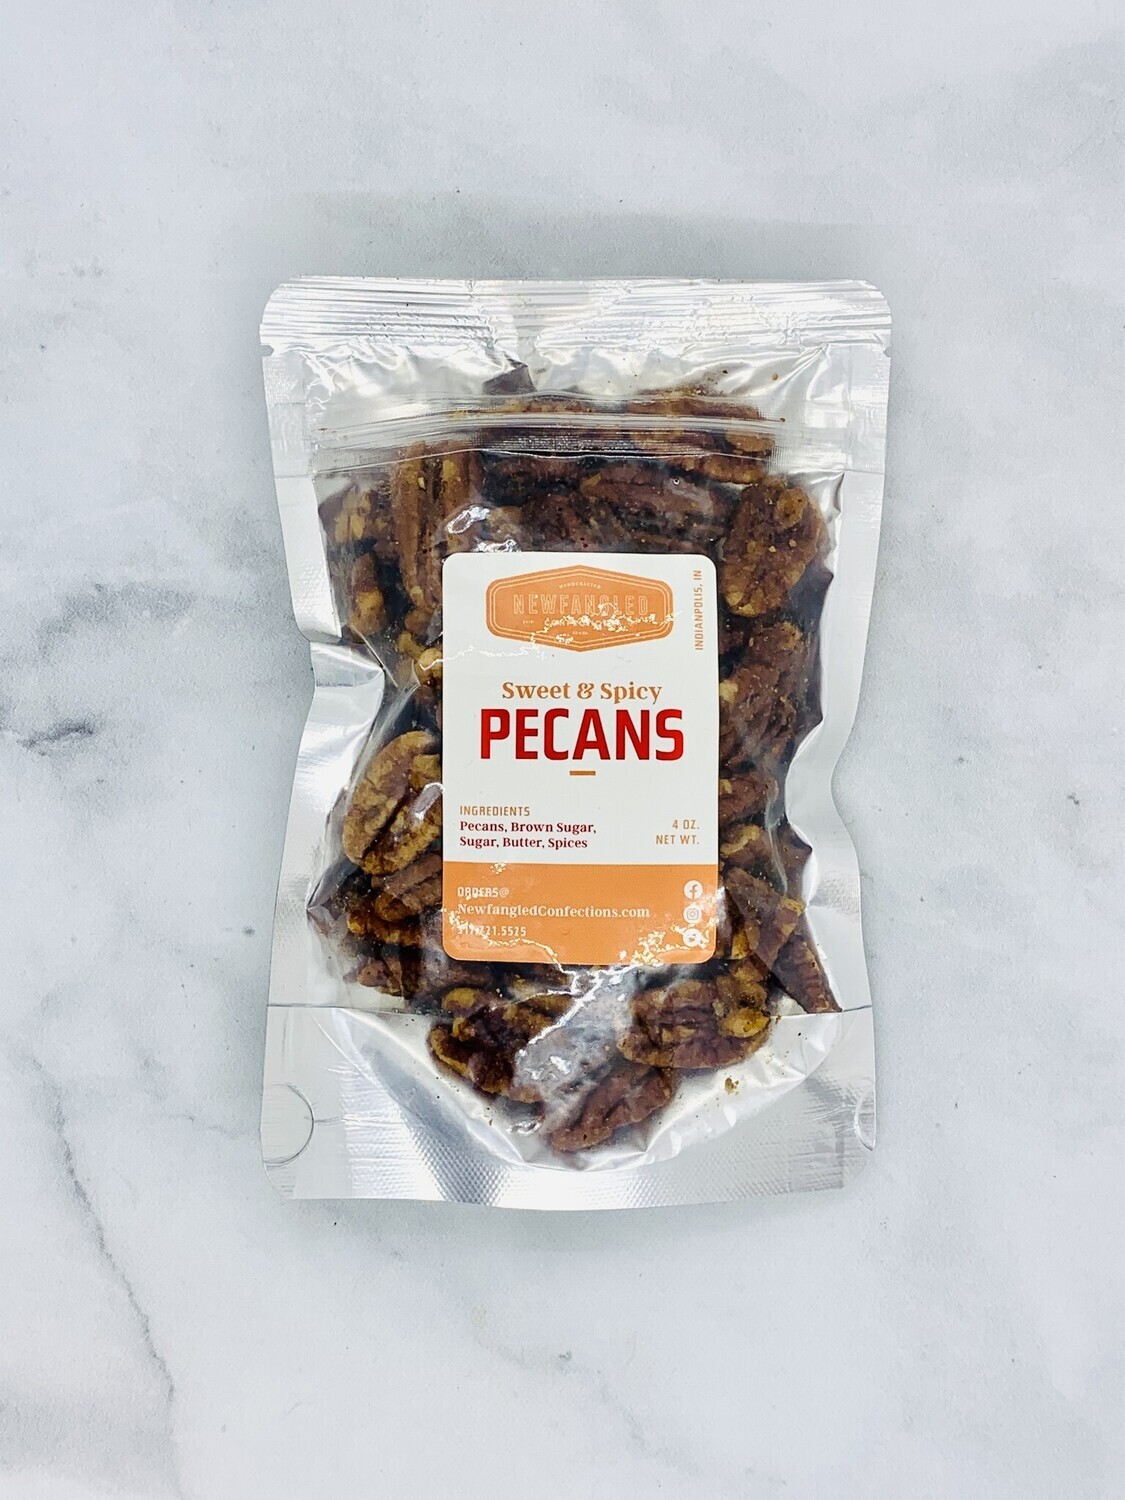 4oz Bag of Sweet & Spicy Pecans by Newfangled Confections